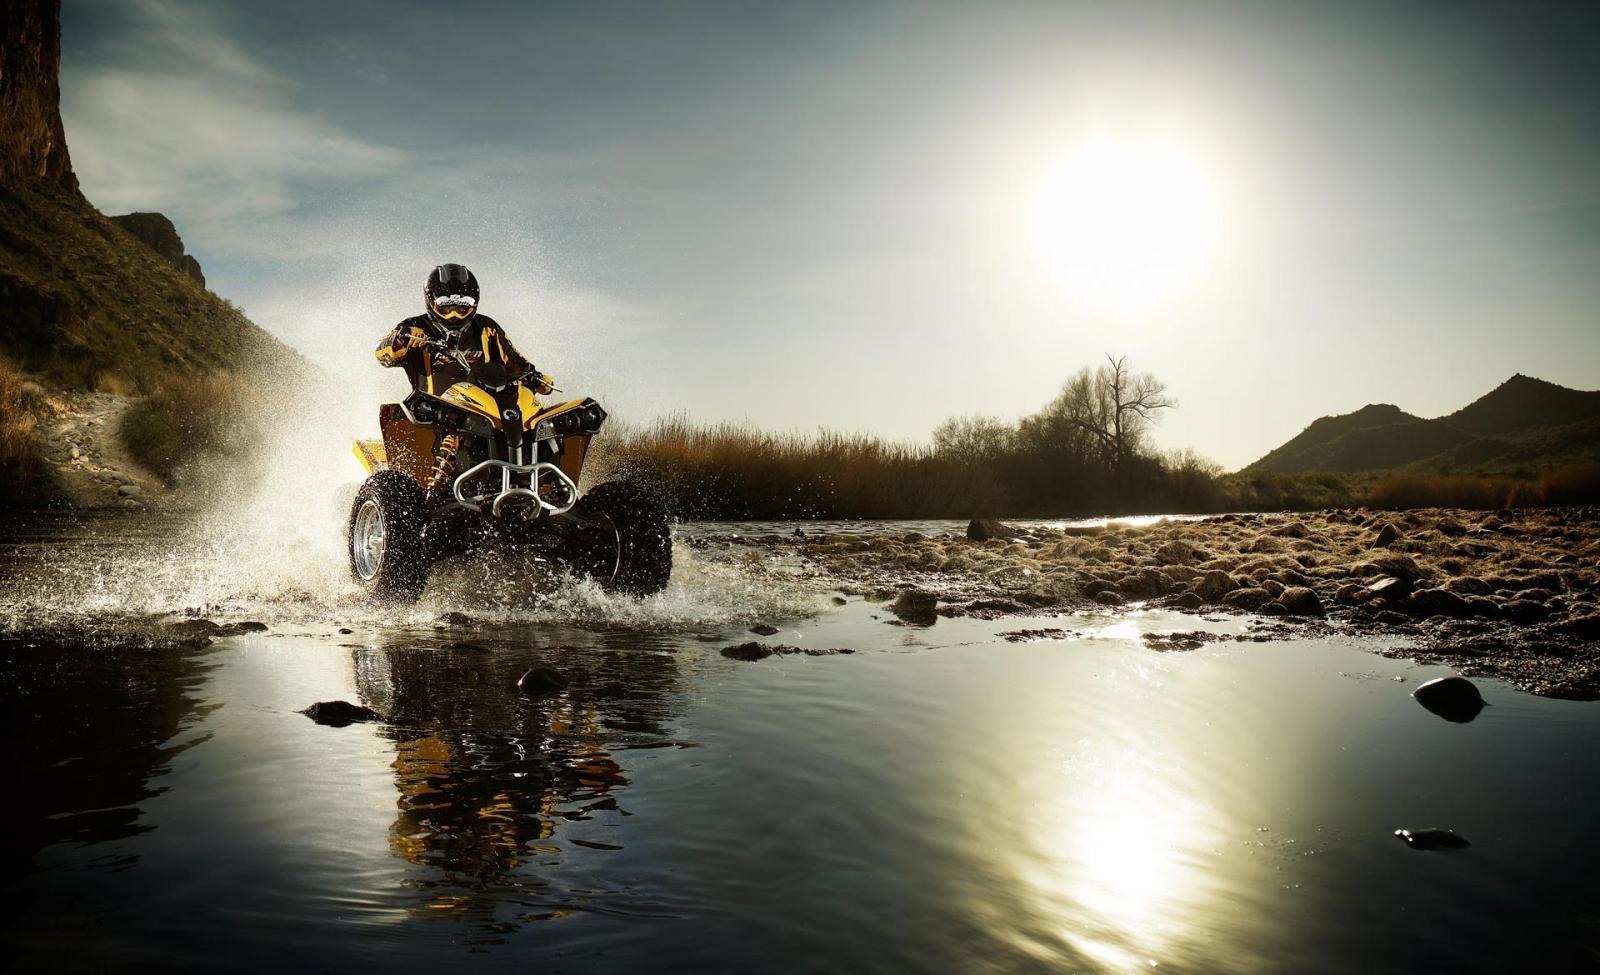 ATV free Wallpaper (13 photo) for your desktop, download picture